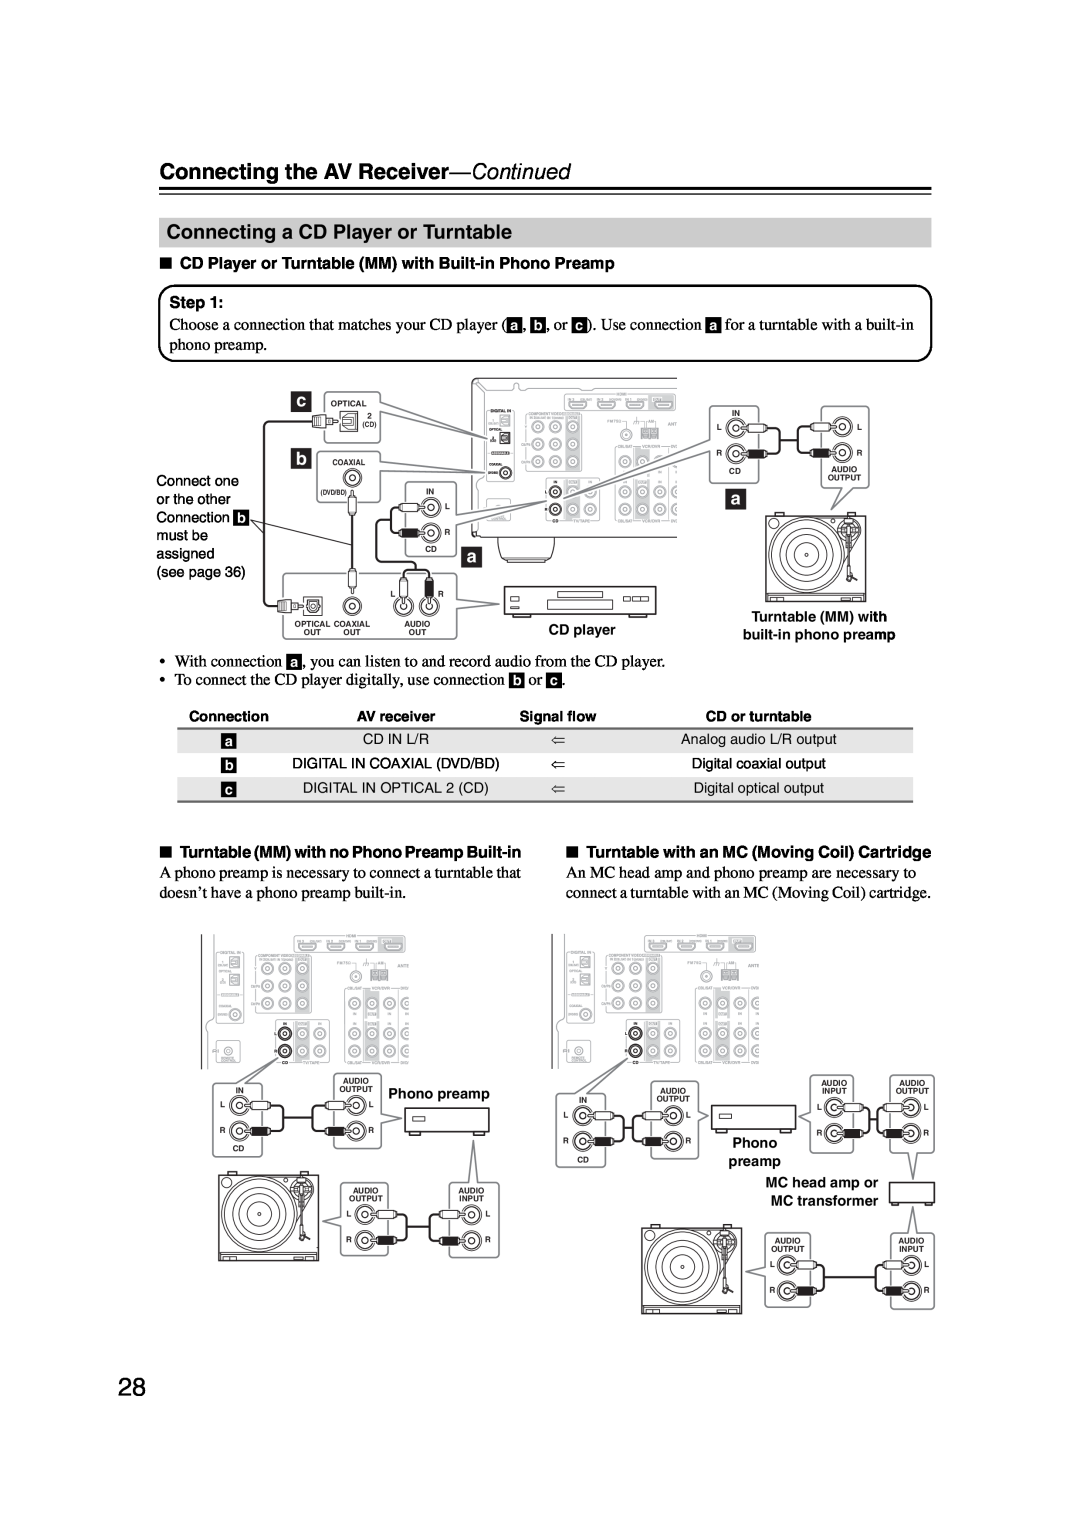 Onkyo TXSR307 instruction manual Connecting a CD Player or Turntable, Connecting the AV Receiver-Continued, Step 